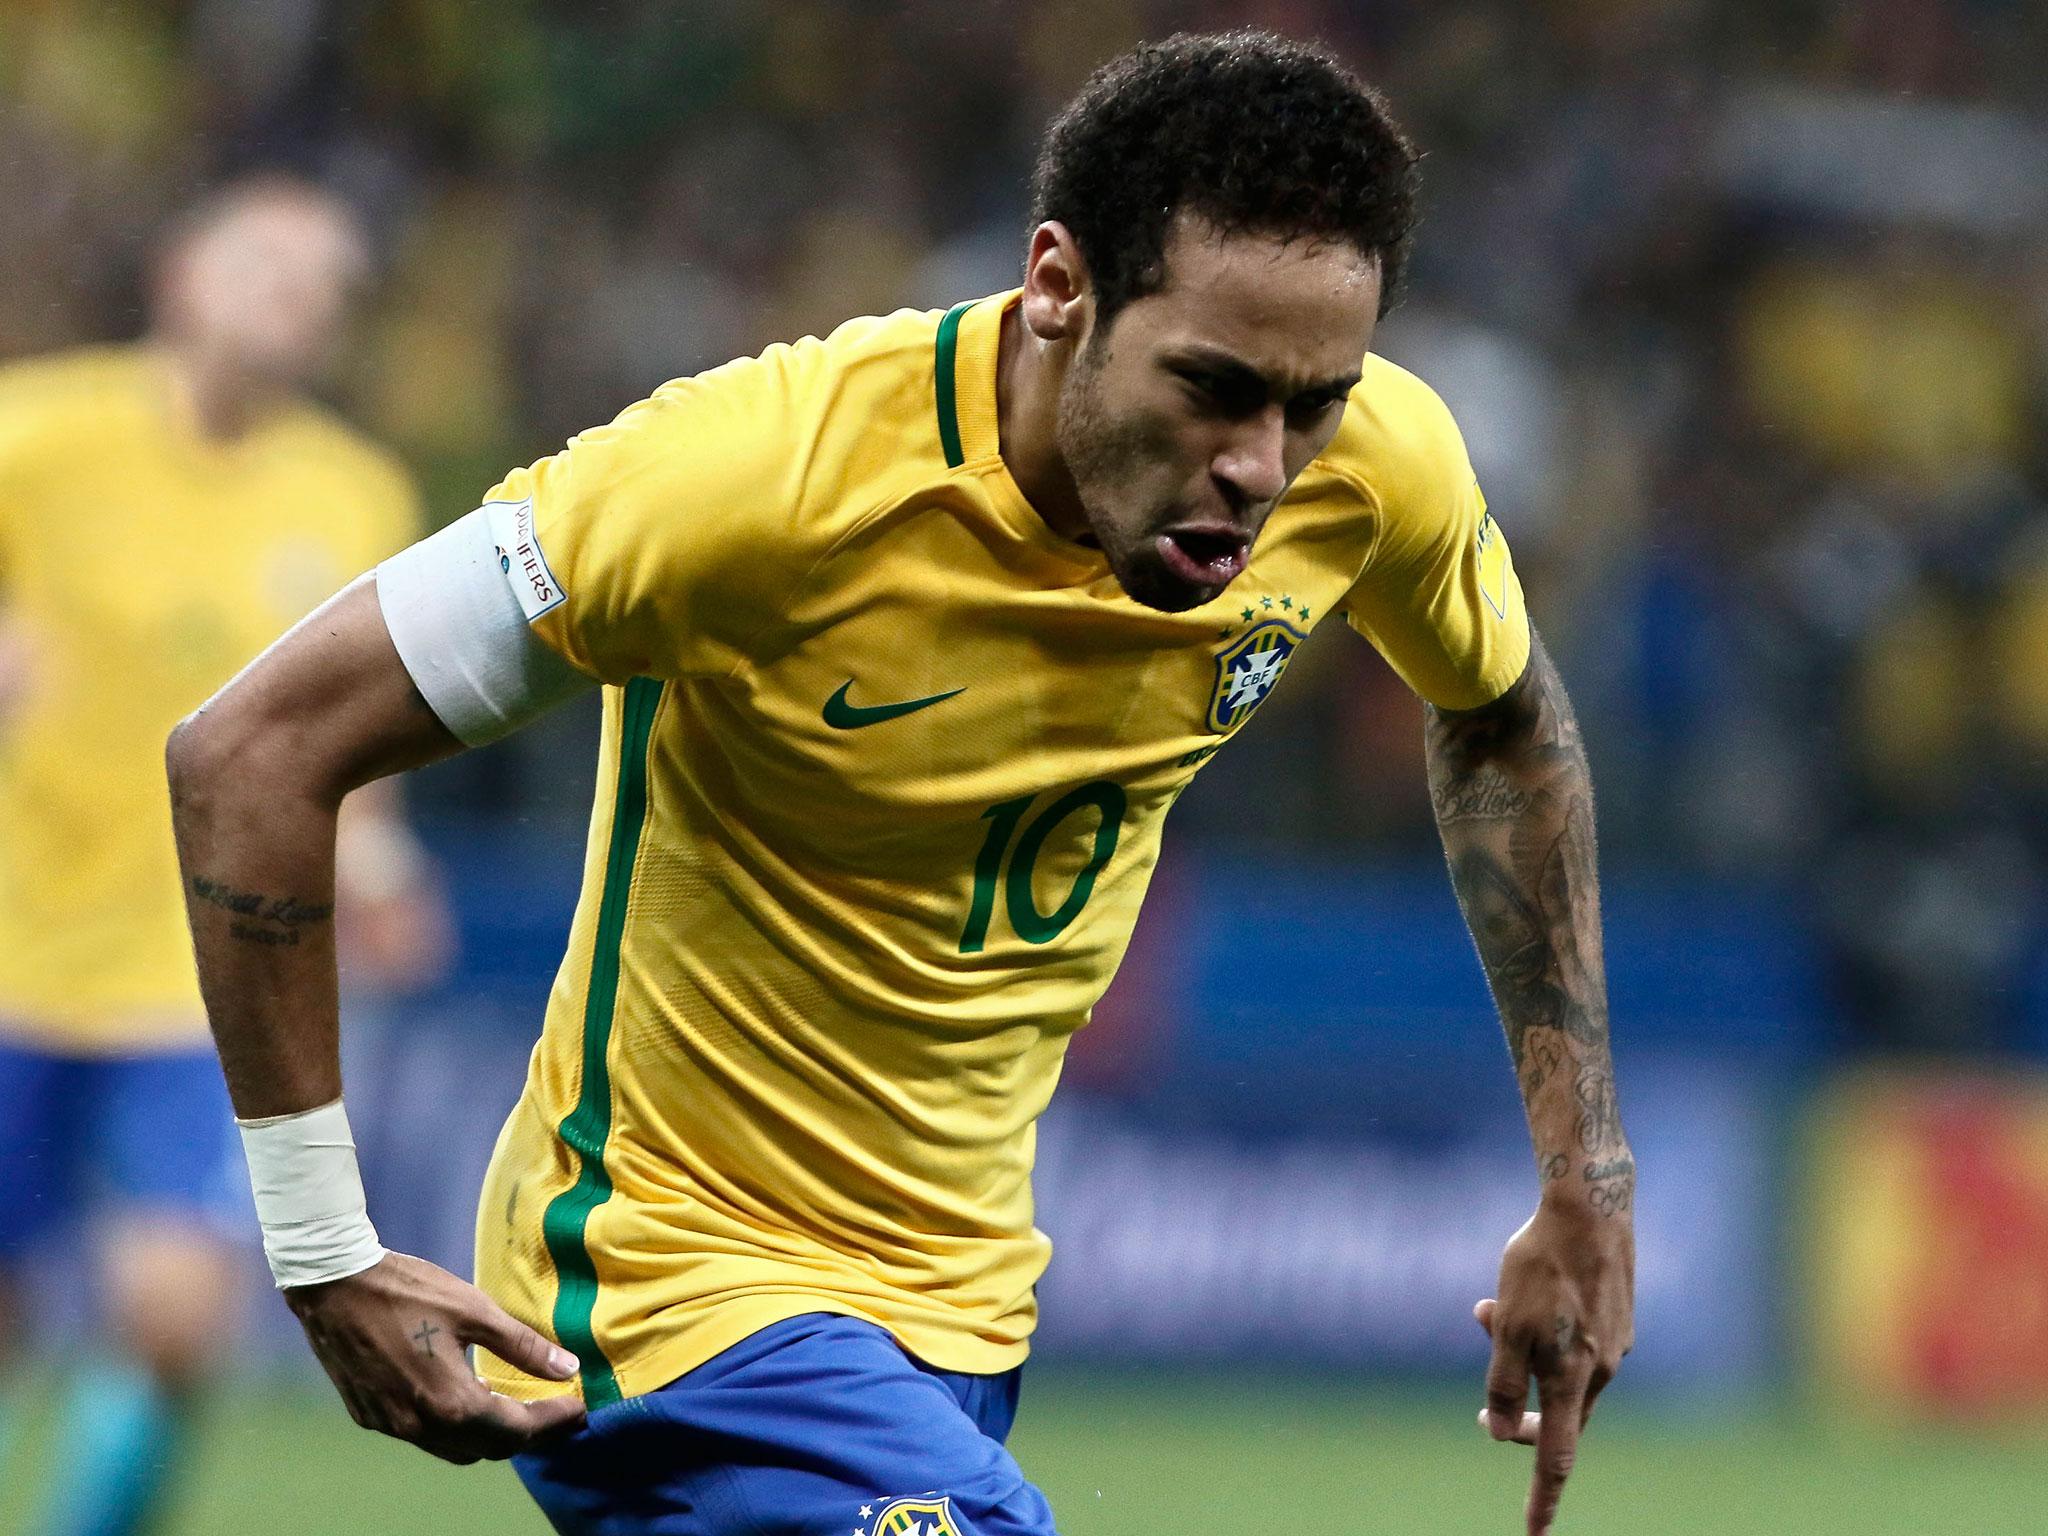 Neymar helped Brazil become the first nation to qualify for the 2018 World Cup